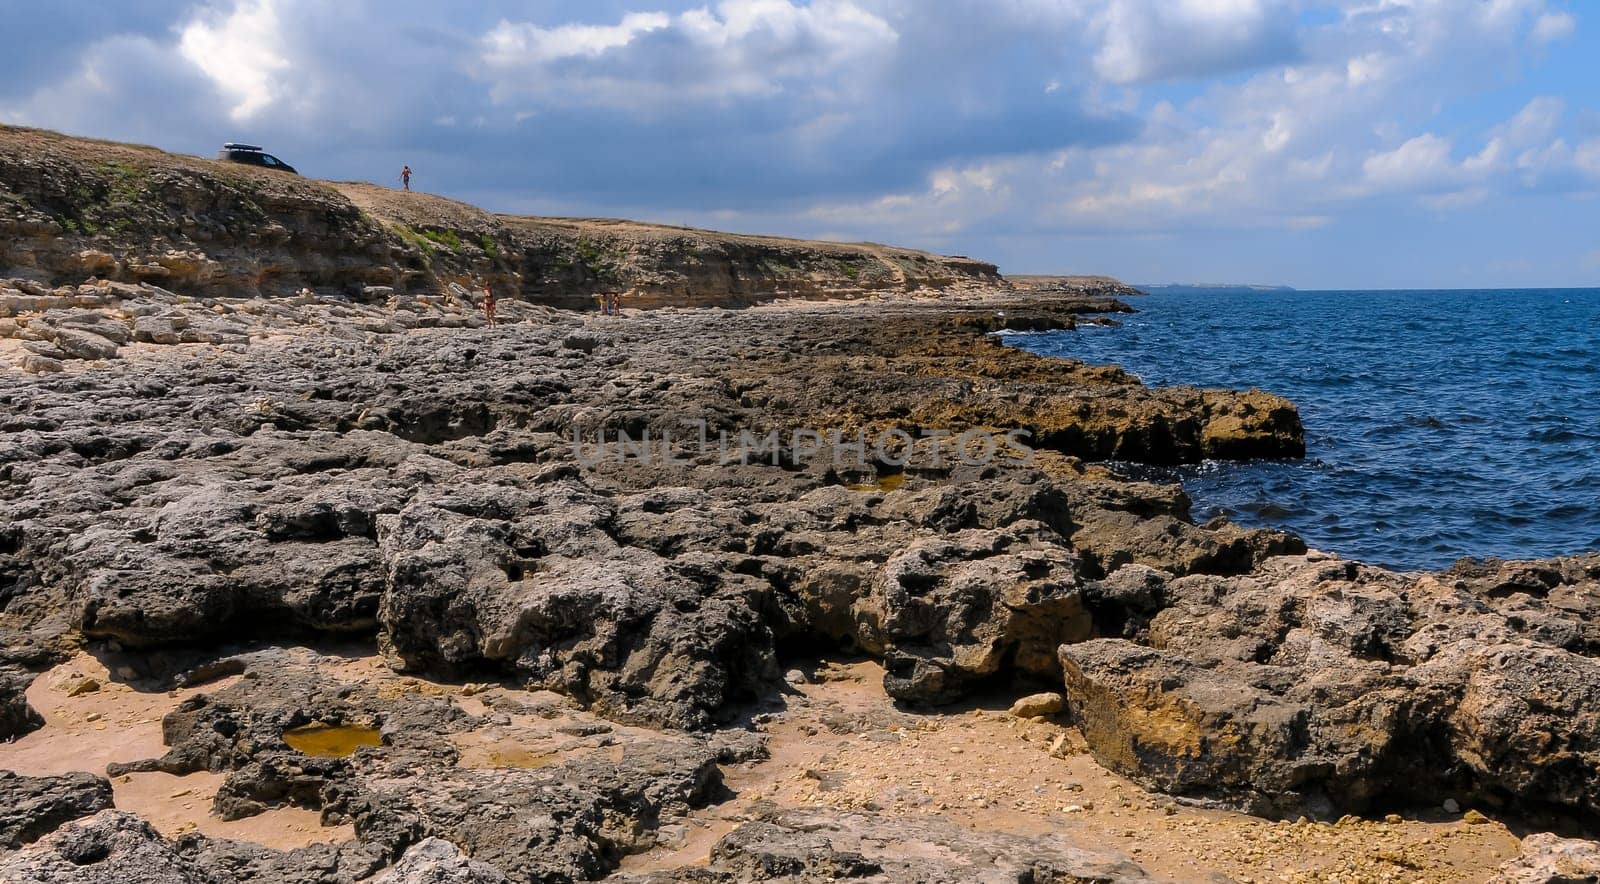 Flat rocky shore with many littoral puddles rich in life, in the eastern Crimea, Black Sea by Hydrobiolog